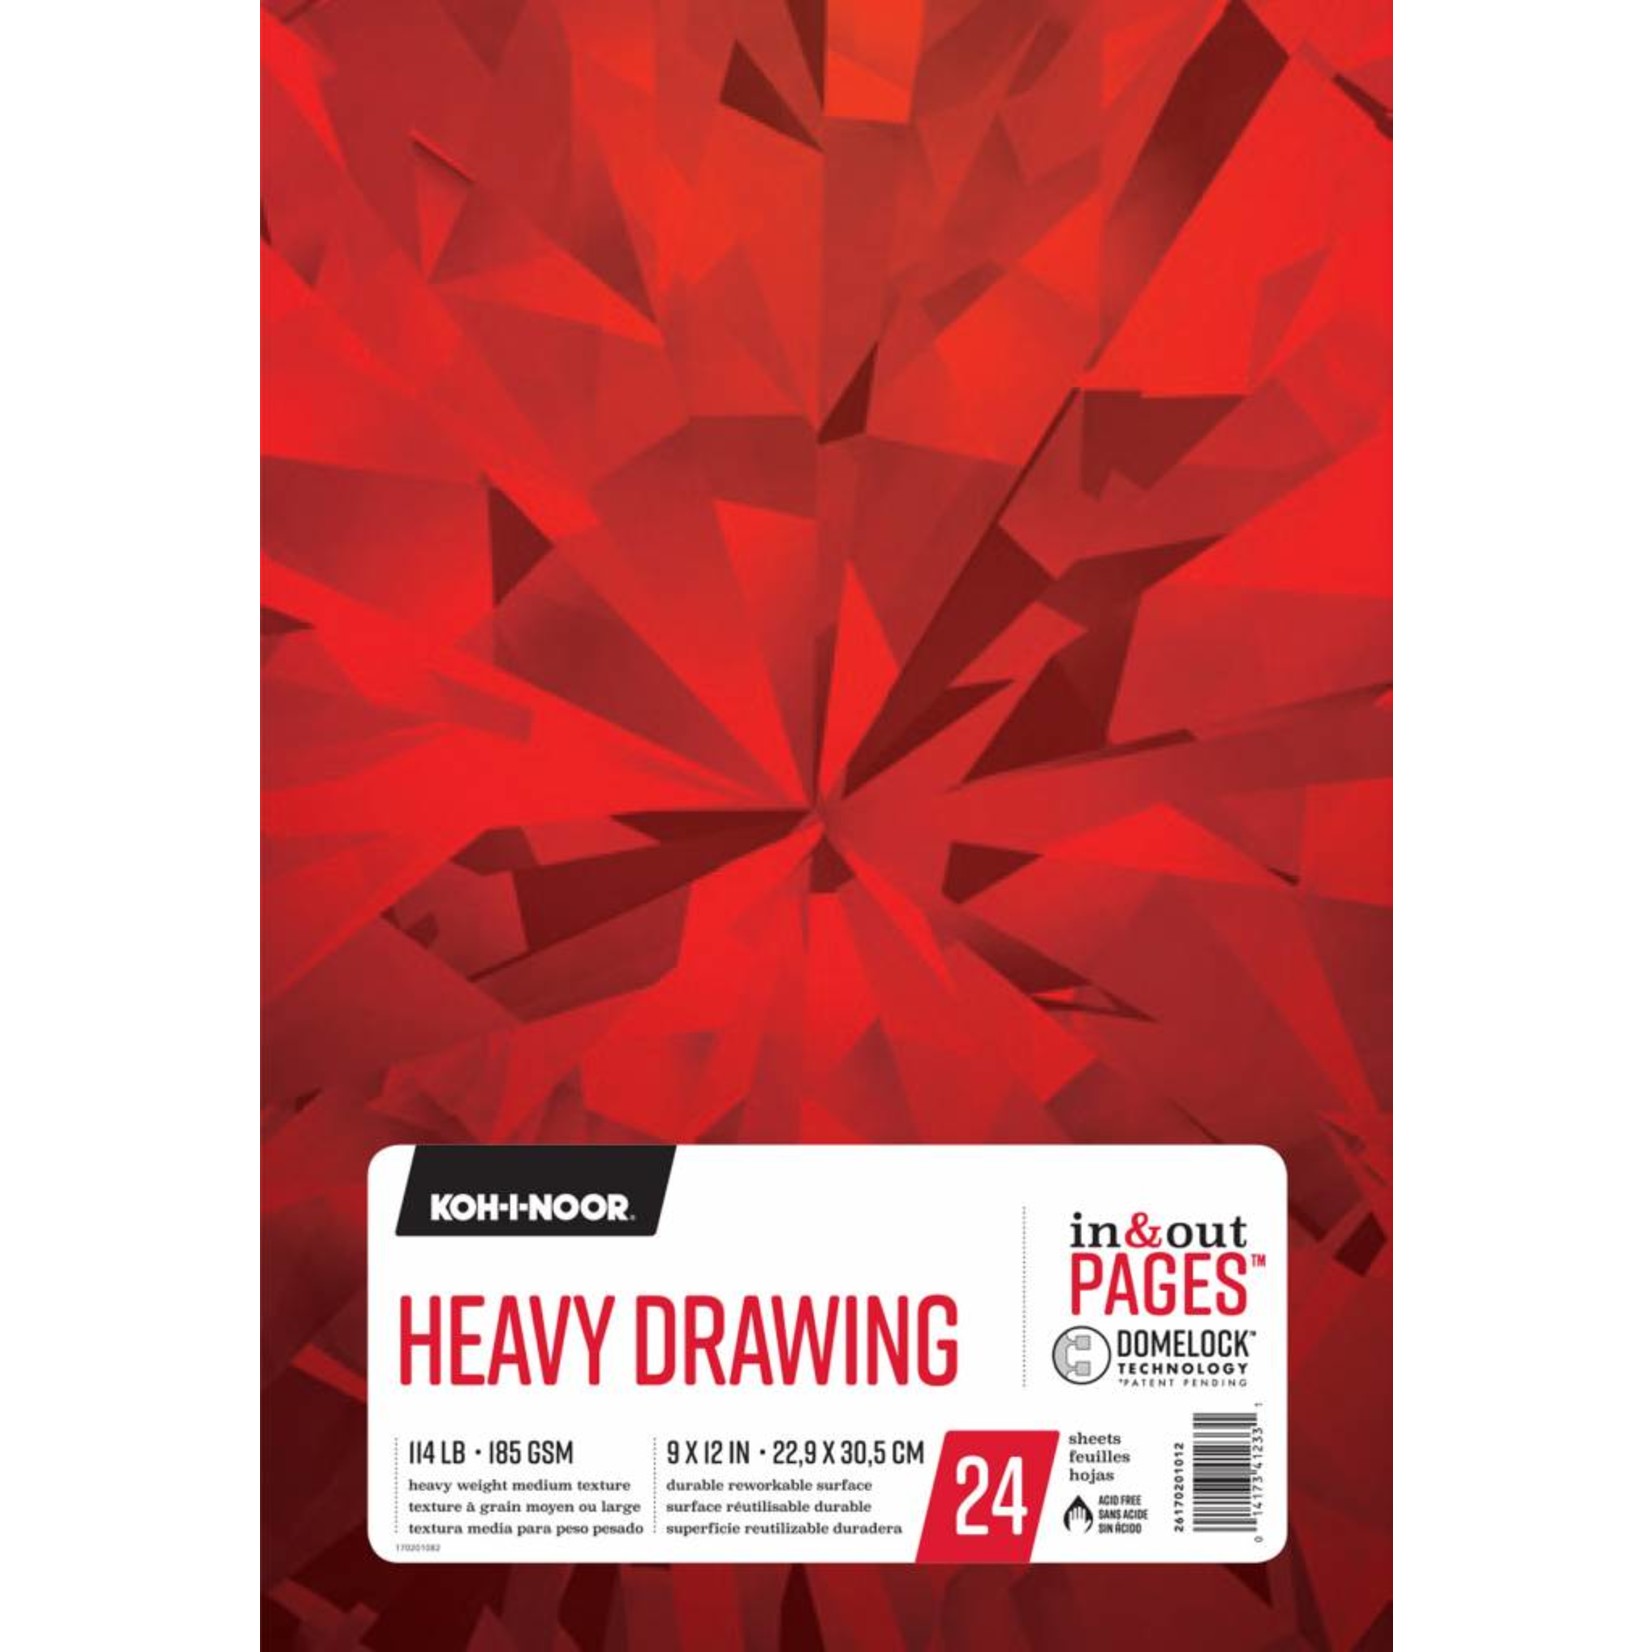 Koh-i-Noor 9" x 12" 114 lb. (185 gsm) Heavy Drawing (In & Out Pages) 24 Sheet Dual Loop Wire Bound Pad